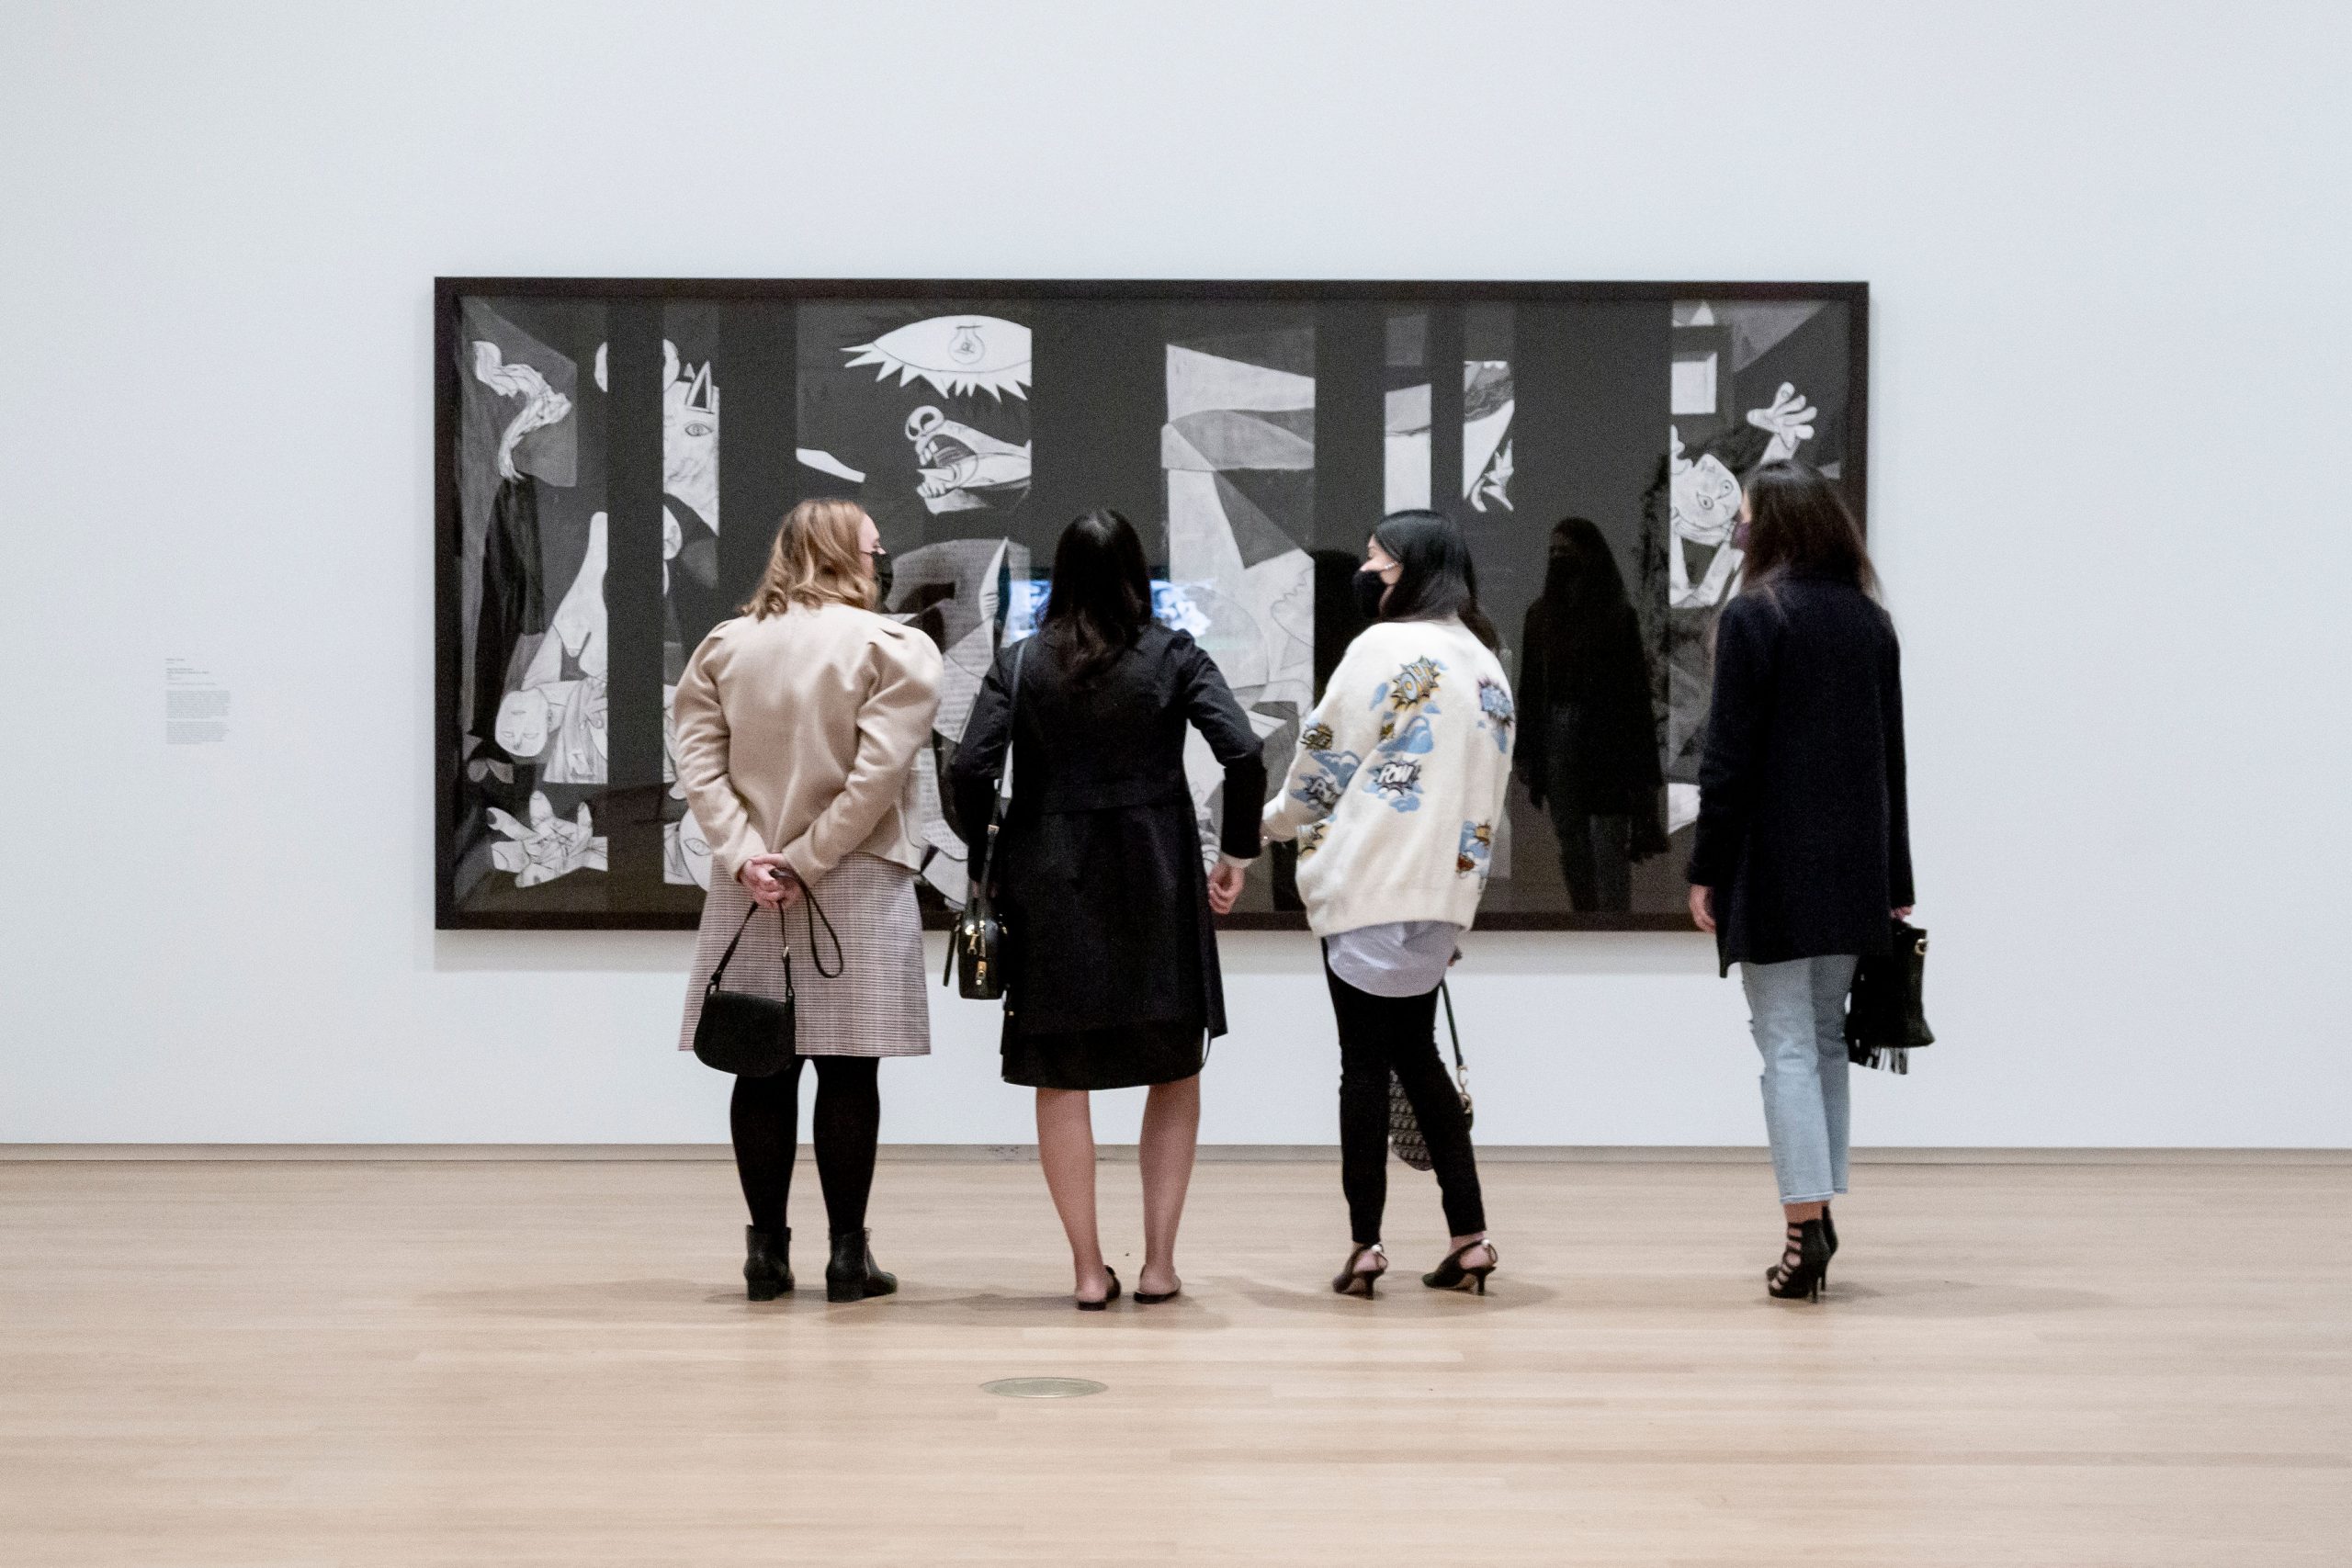 4 people standing in front of an artwork